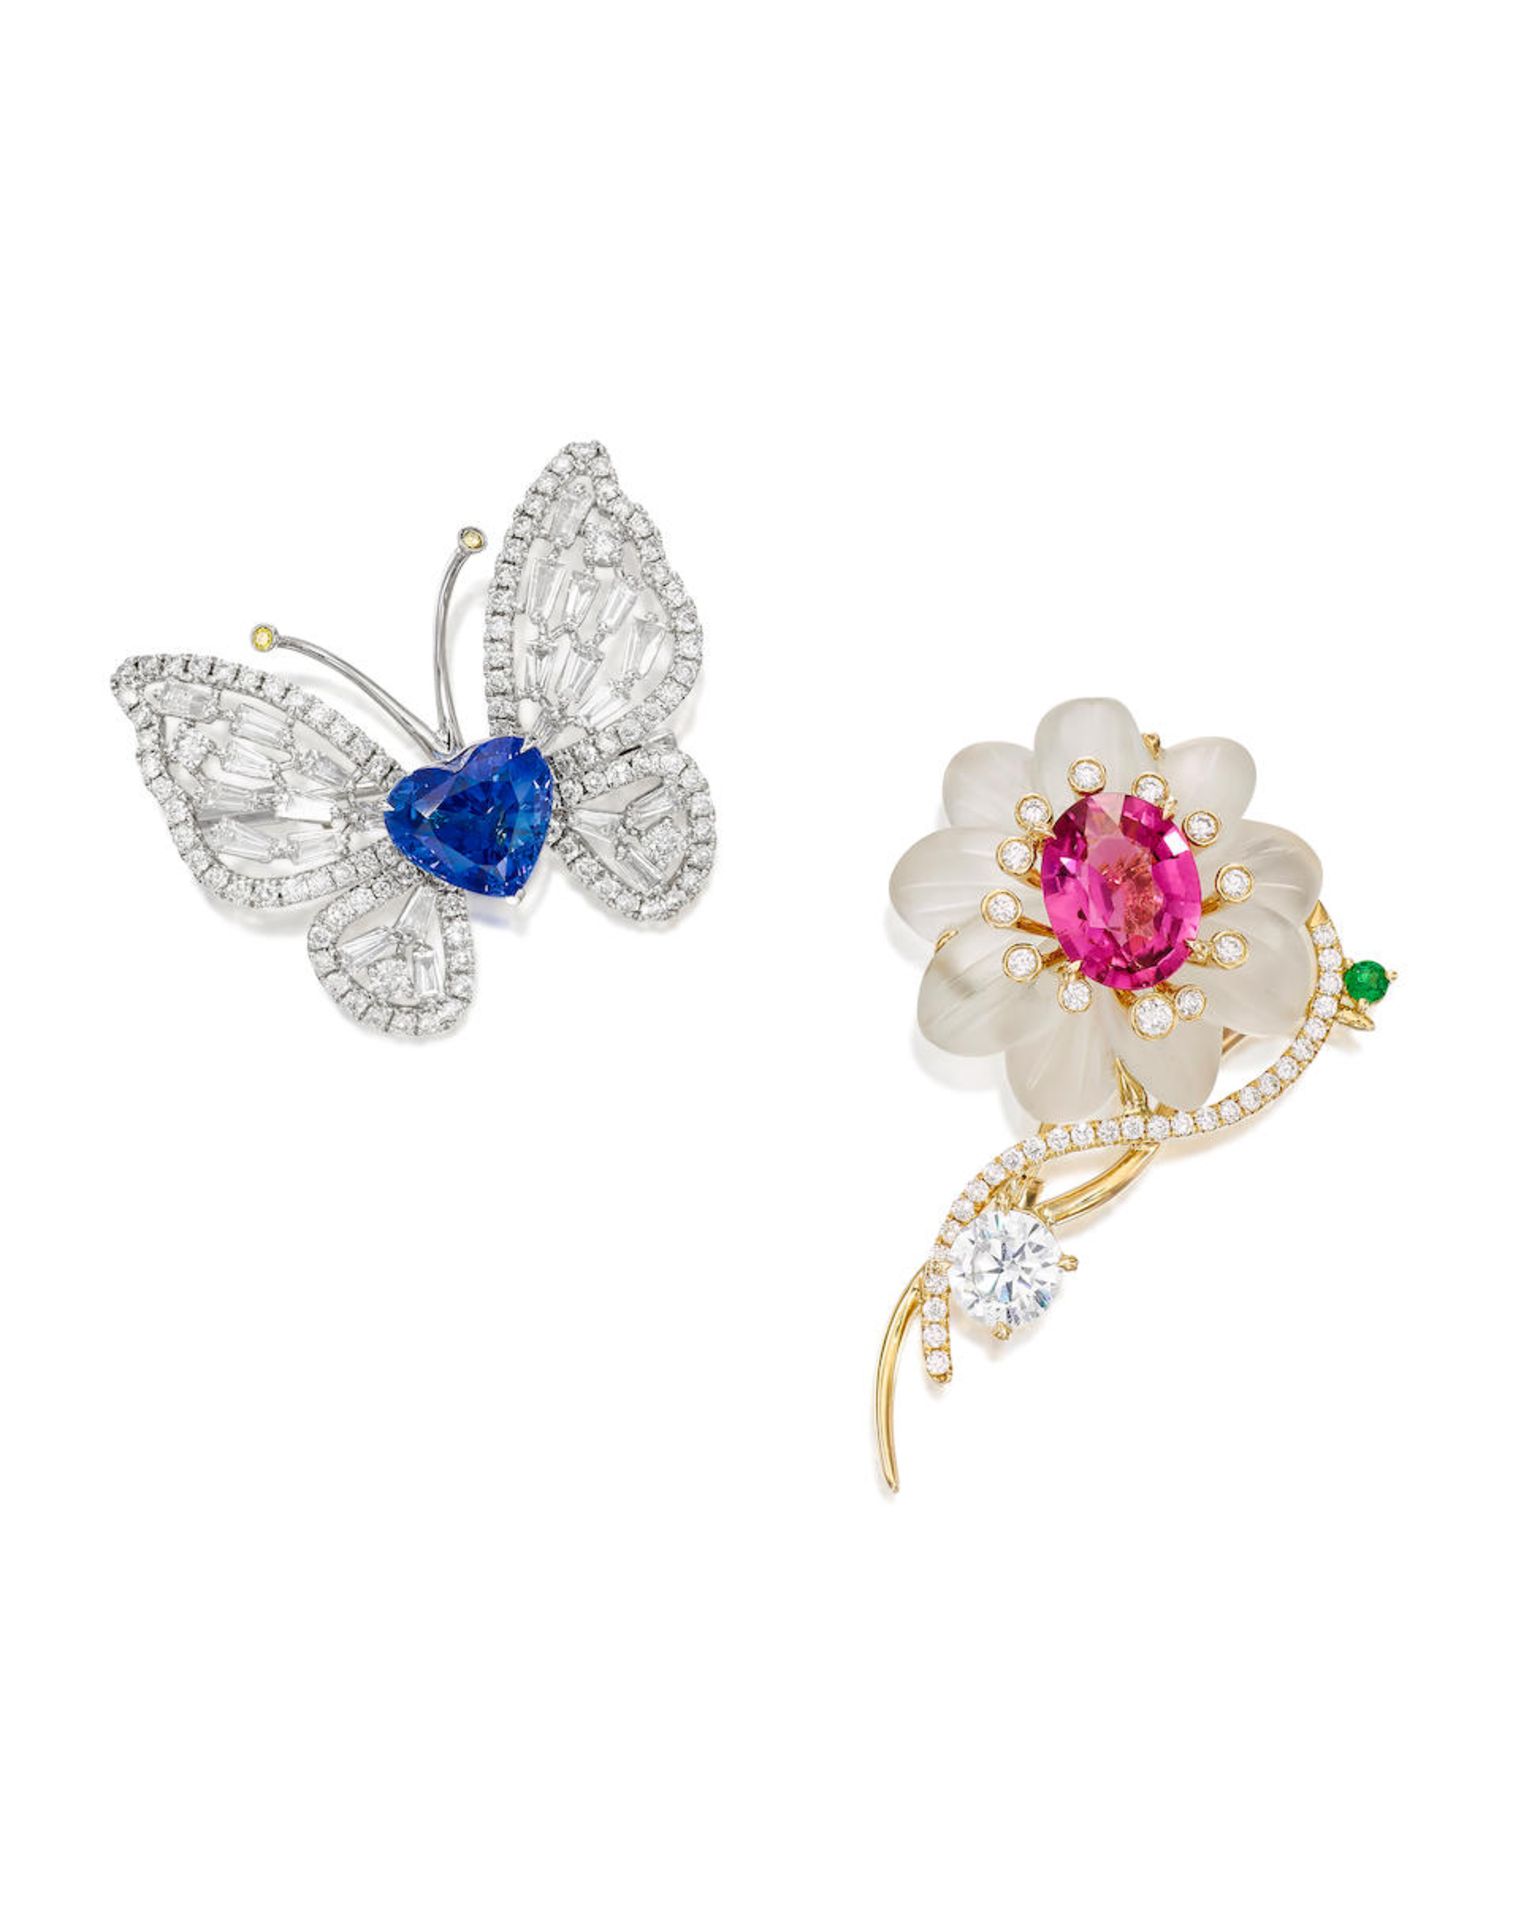 SAPPHIRE AND DIAMOND 'BUTTERFLY' BROOCH/ PENDANT, AND PINK TOURMALINE, GEM-SET AND DIAMOND 'FLOW...